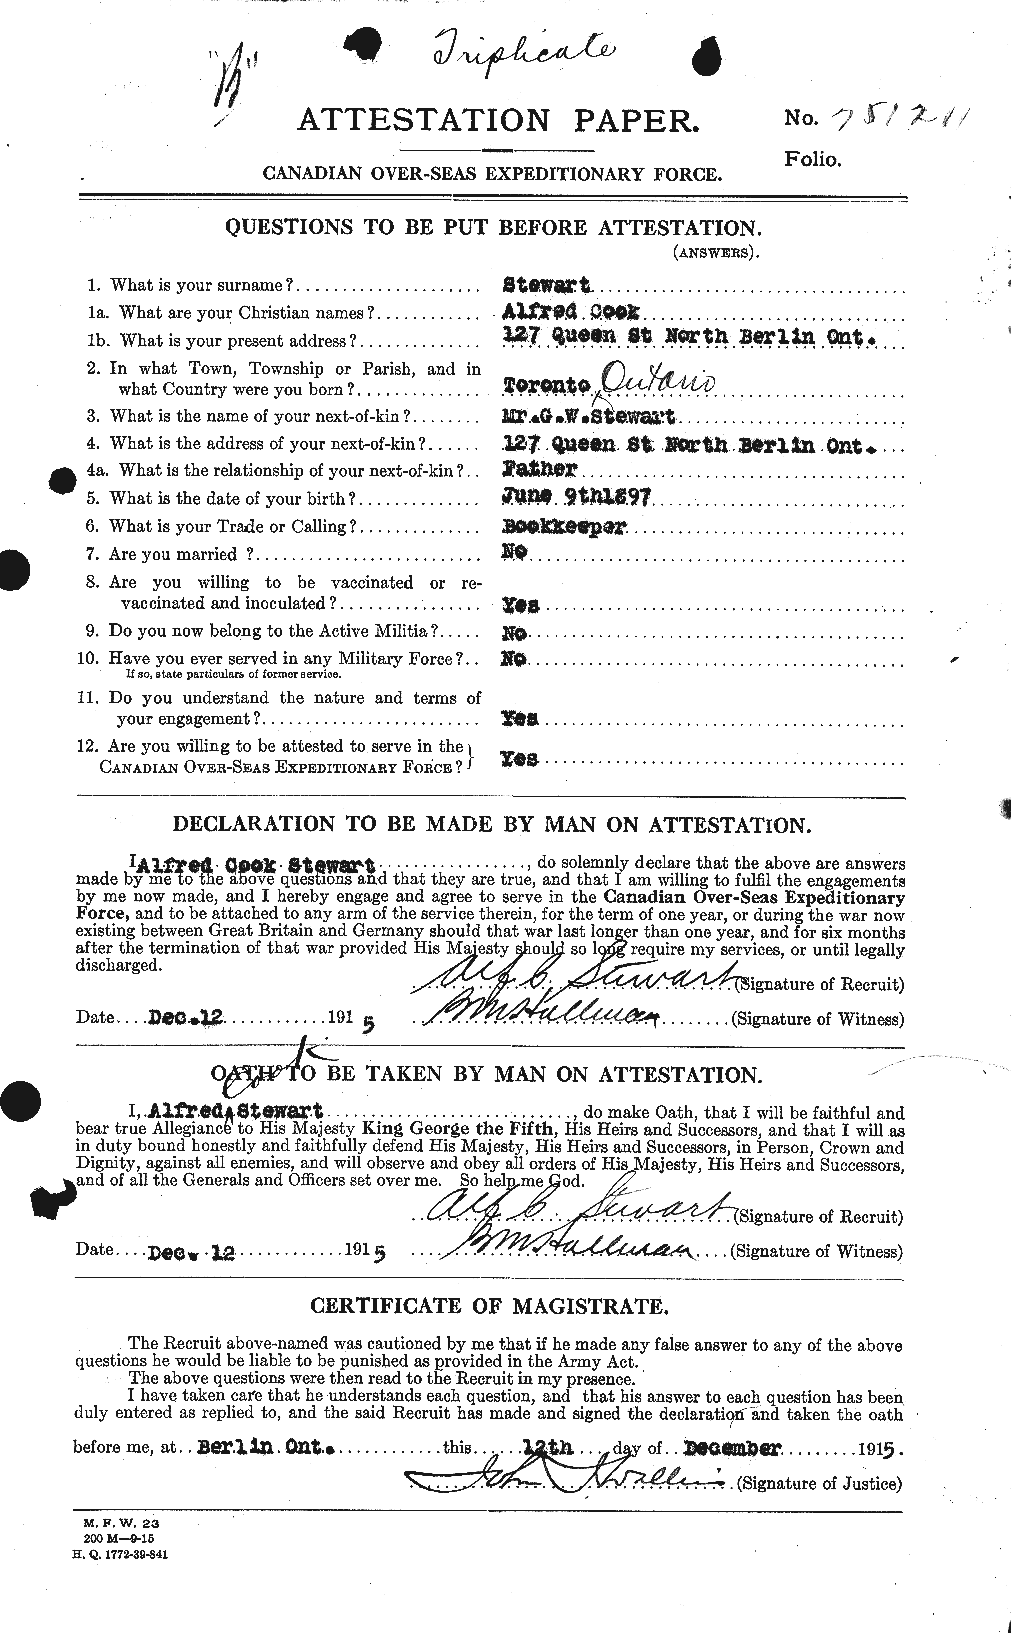 Personnel Records of the First World War - CEF 118550a